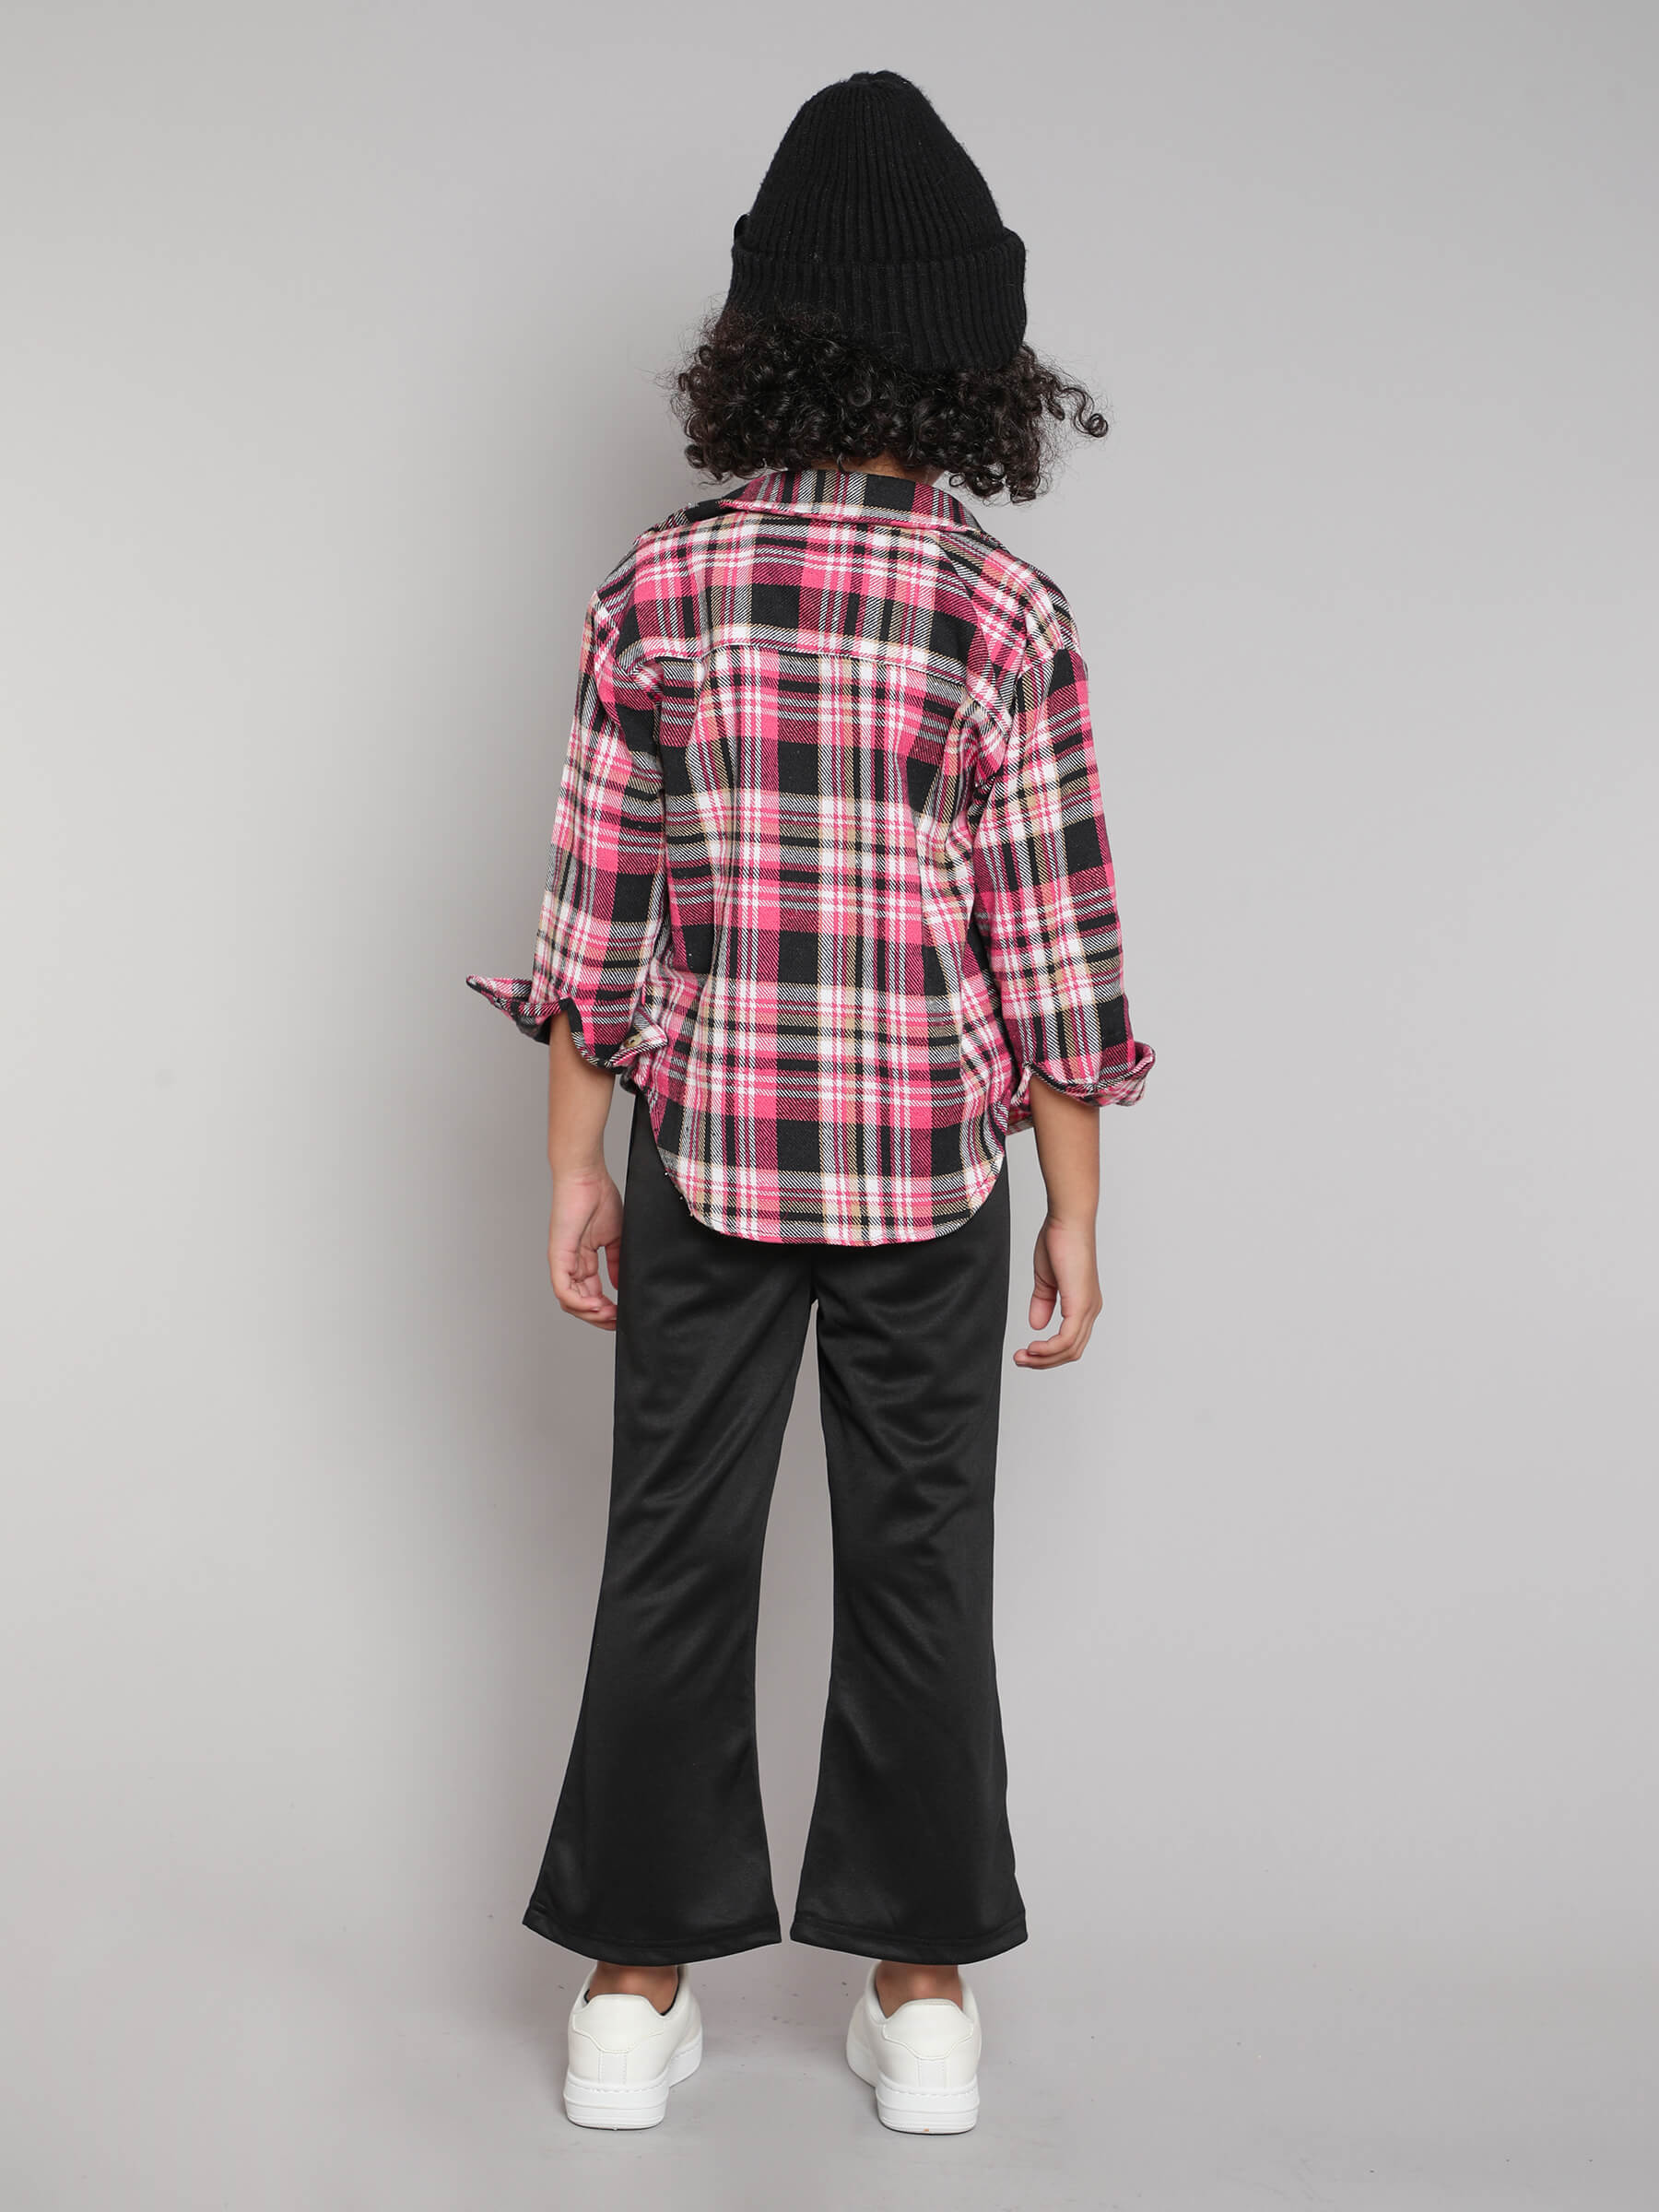 Taffykids solid  crop top and bell bottom pant set with checked shirt-Black/Pink